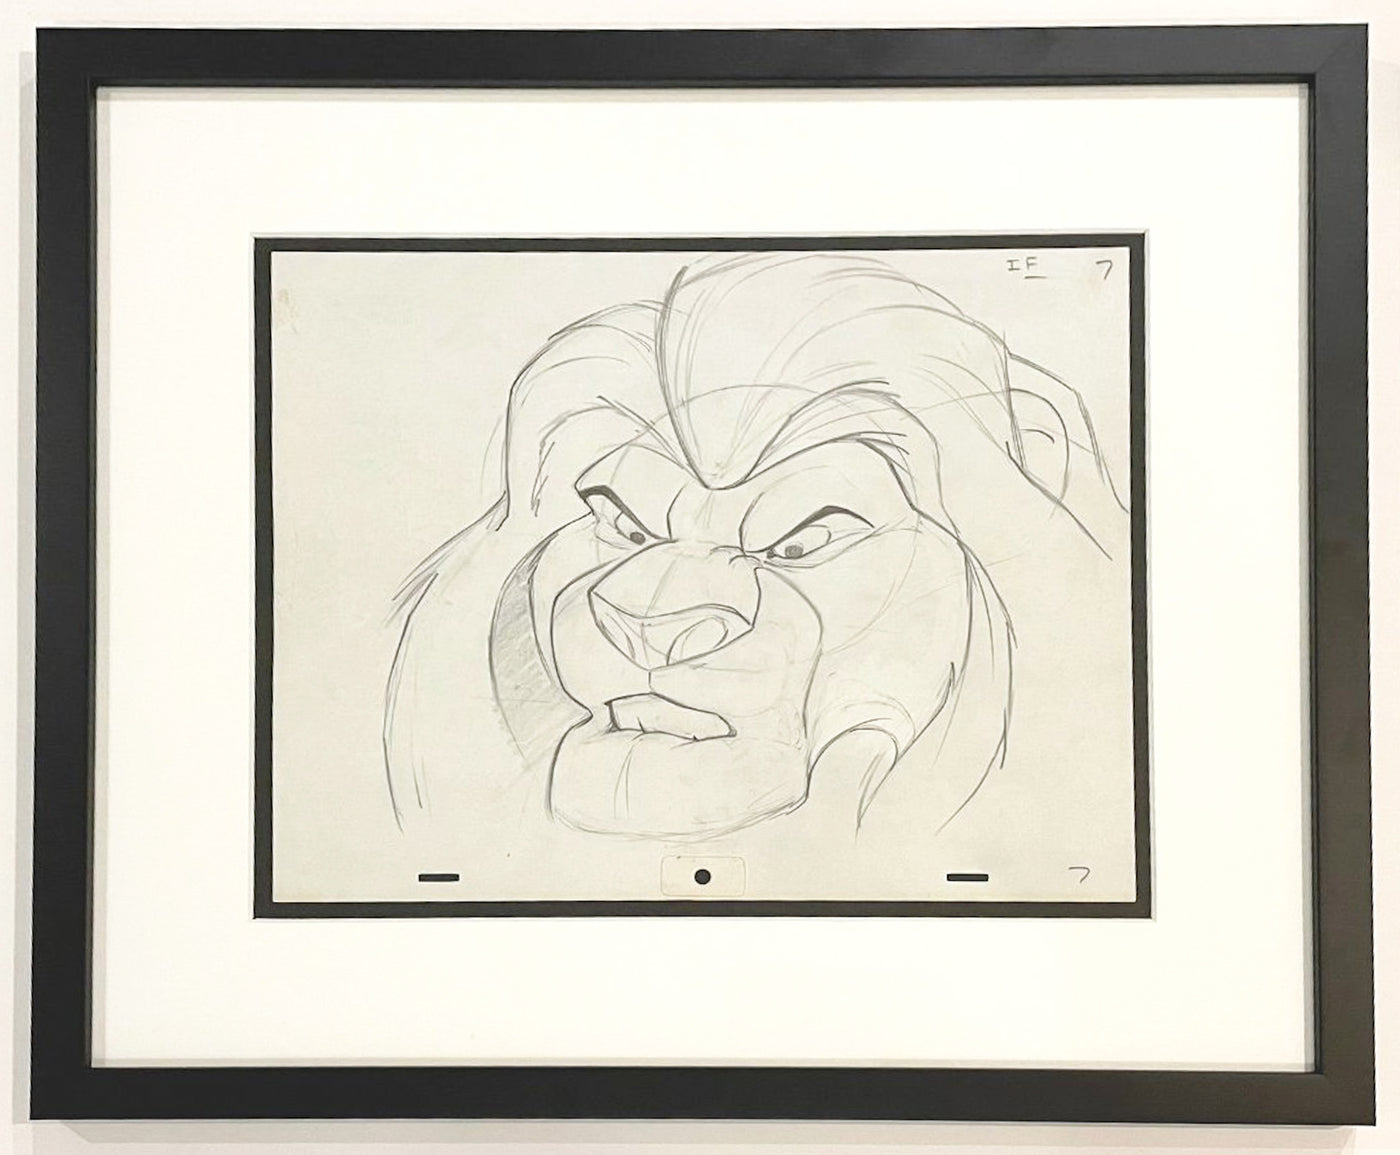 Walt Disney Production Drawing from The Lion King featuring Mufasa